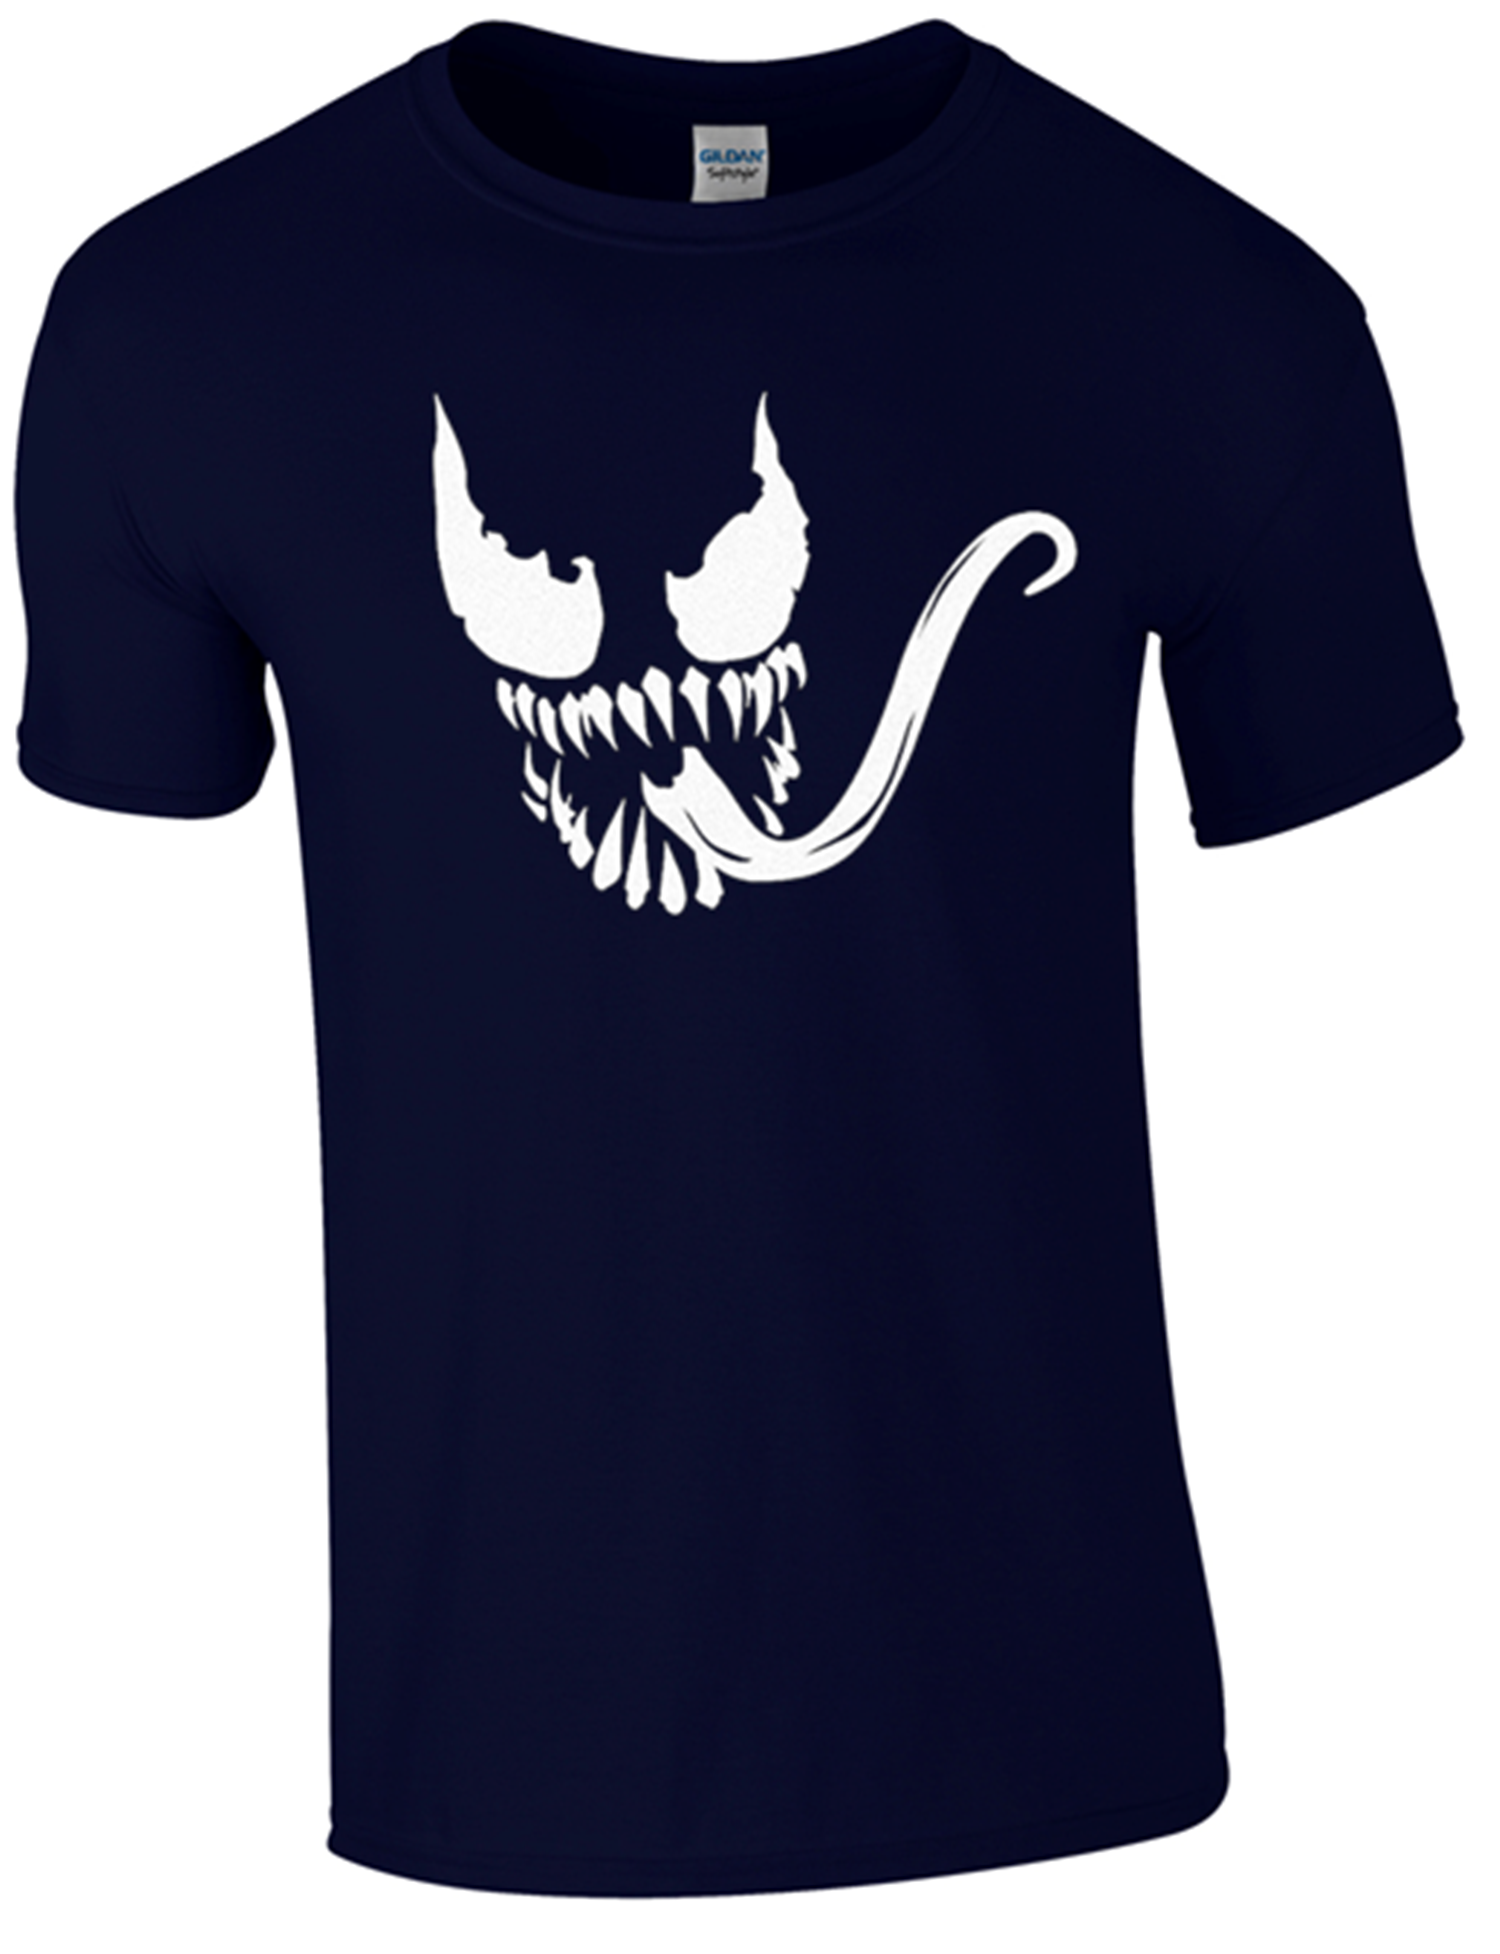 Scary Face T-Shirt Printed DTG (Direct to Garment) for a Permanent Finish. - Army 1157 kit Army 1157 Kit Veterans Owned Business